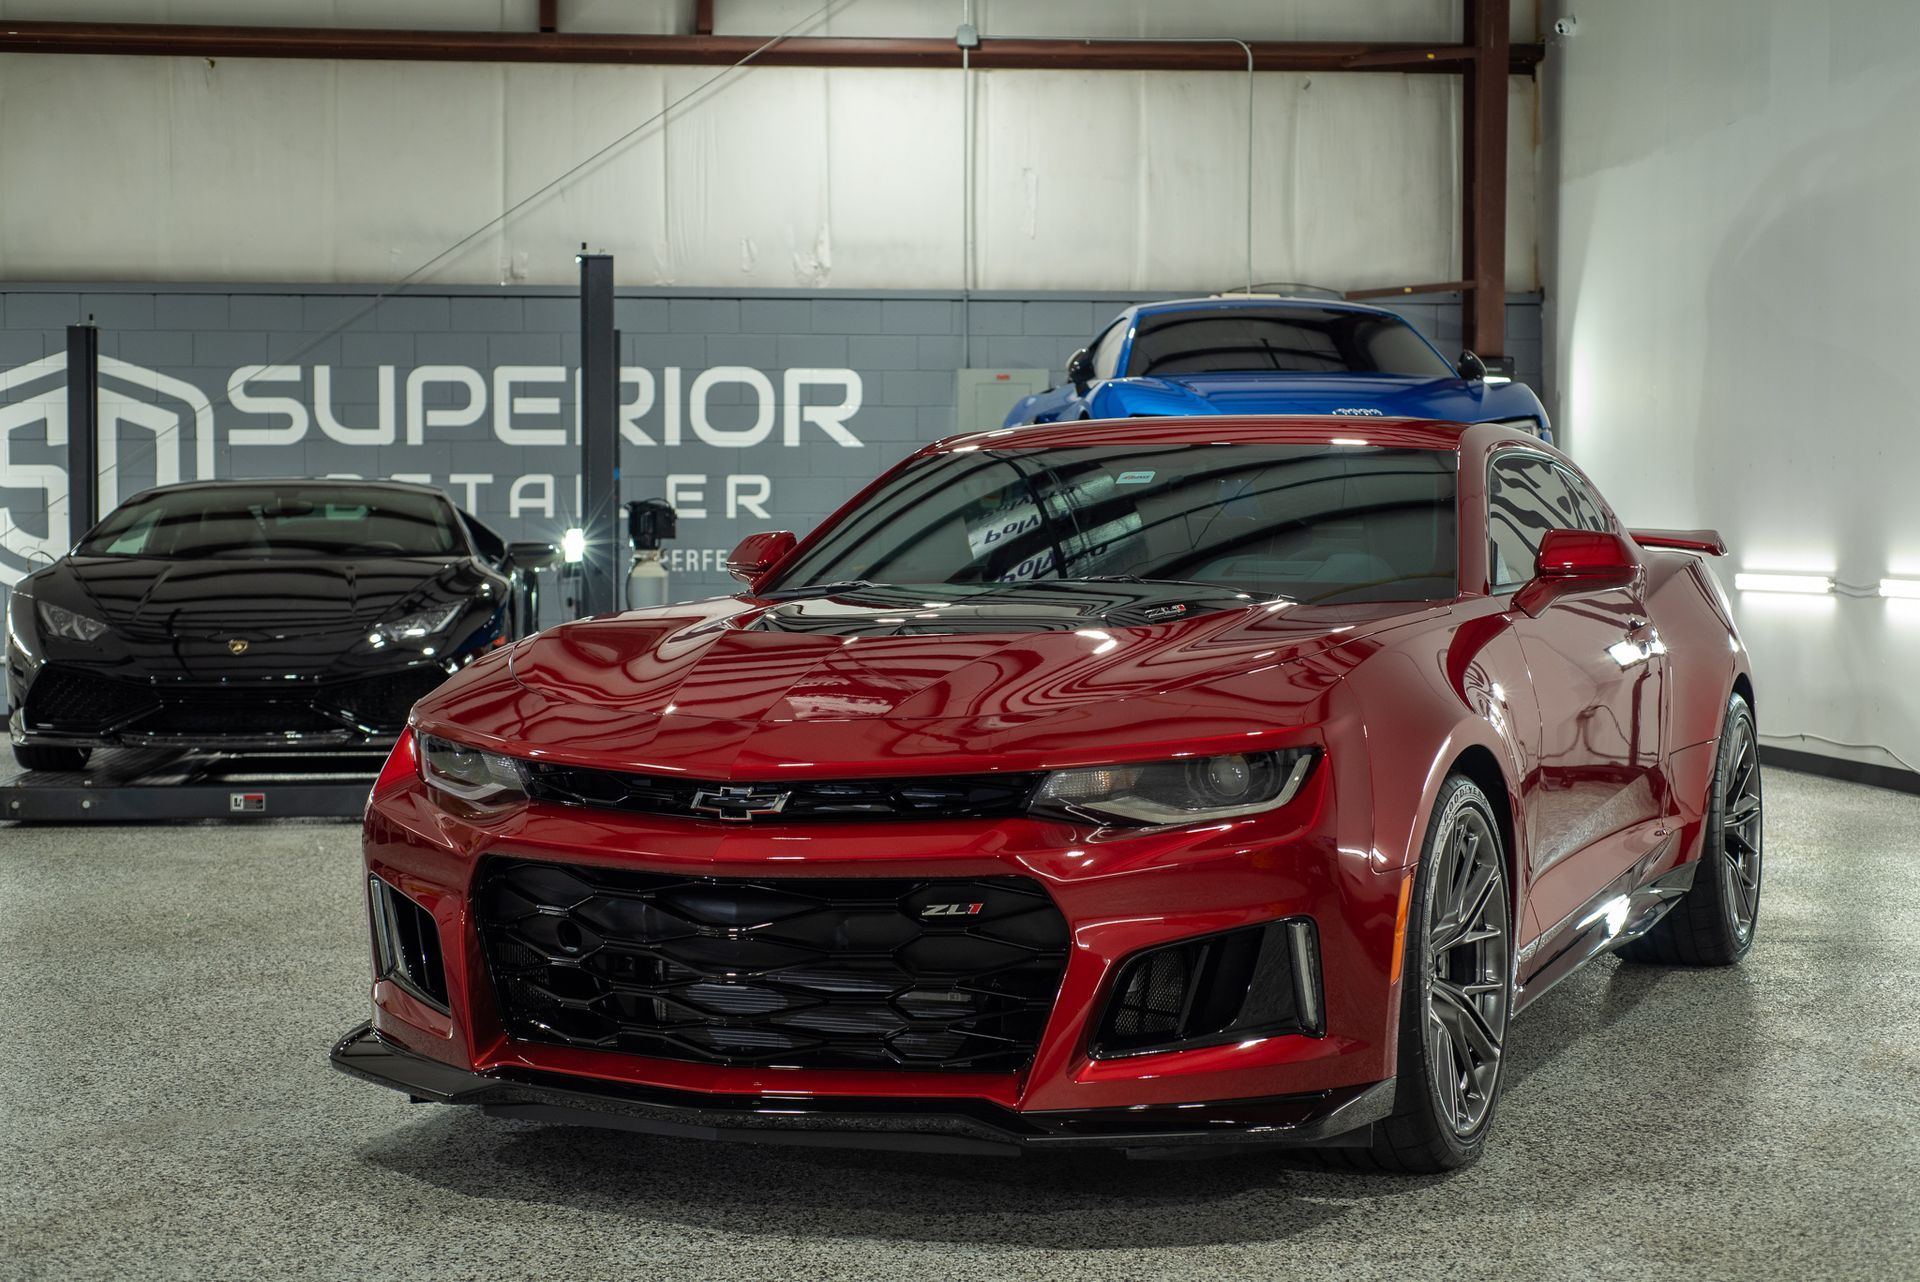 Chevrolet Camaro ZL1 Modesta Ceramic Coating  on paint, wheels, and brake calipers and Xpel Paint Protection Film to Front Bumper and Rear Splash Orlando